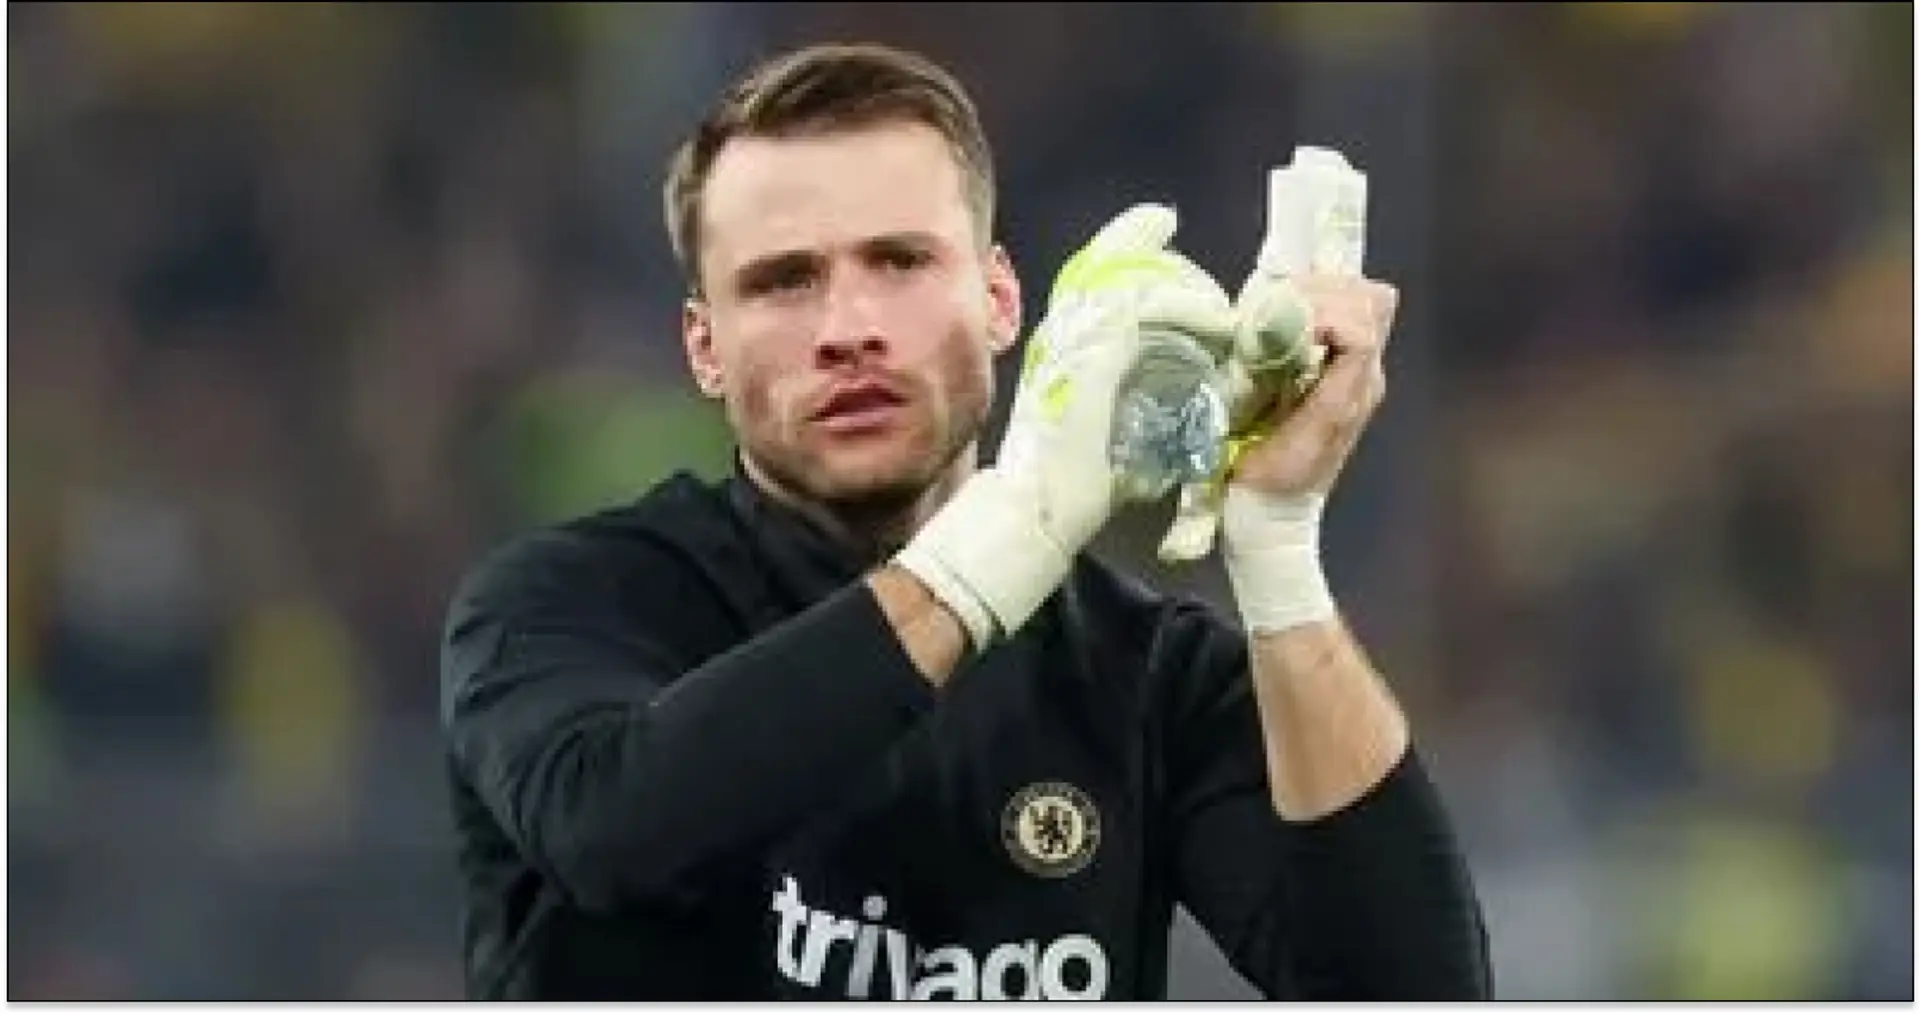 One game in 3 years — third-choice goalie Bettinelli explains his role at Chelsea 